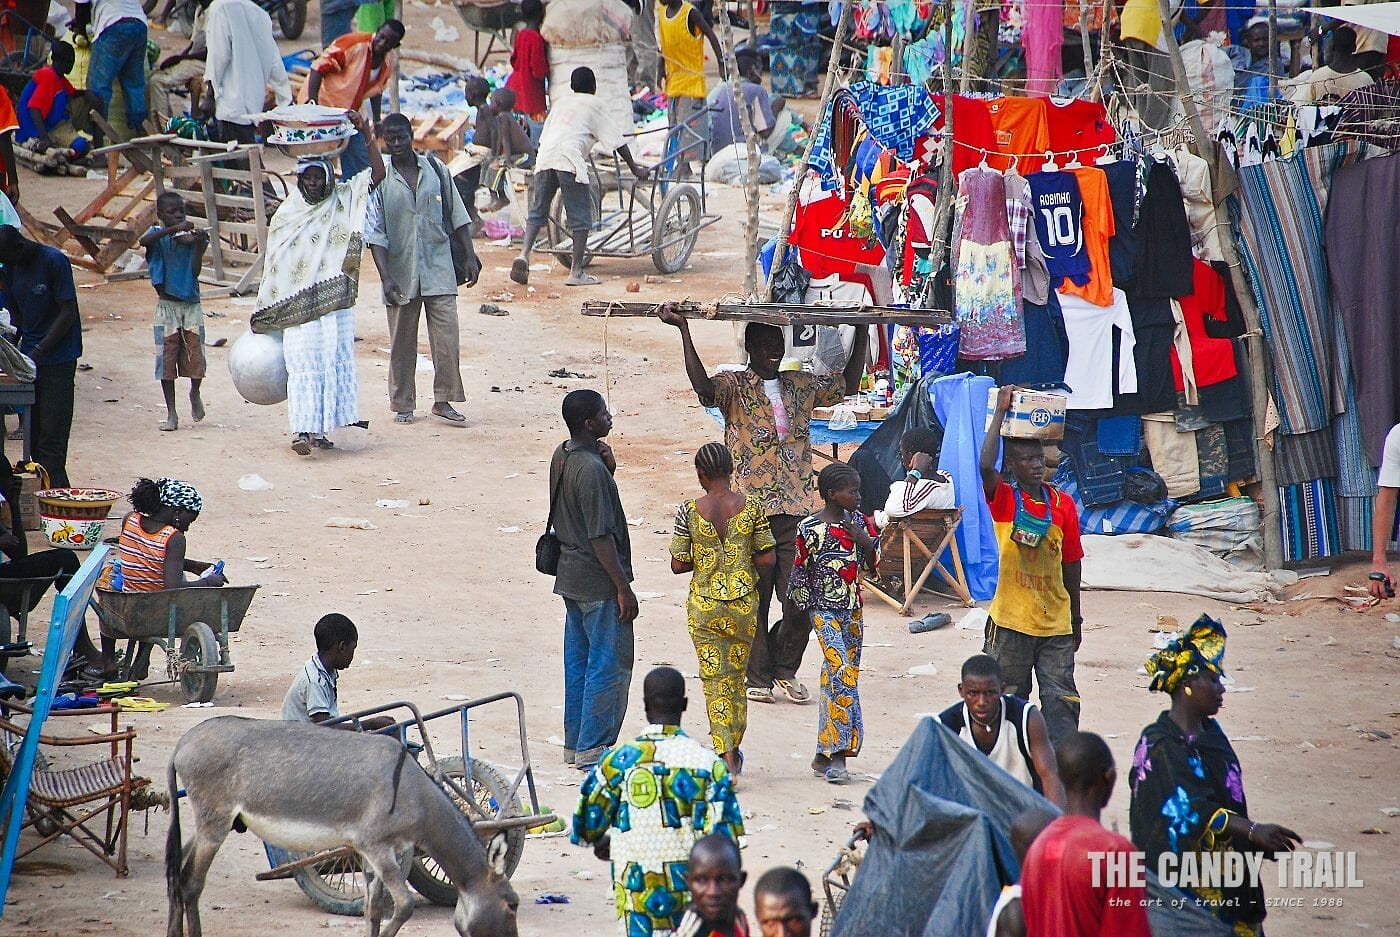 The weekly Monday Market in the ancient town of Djenne in Mali.